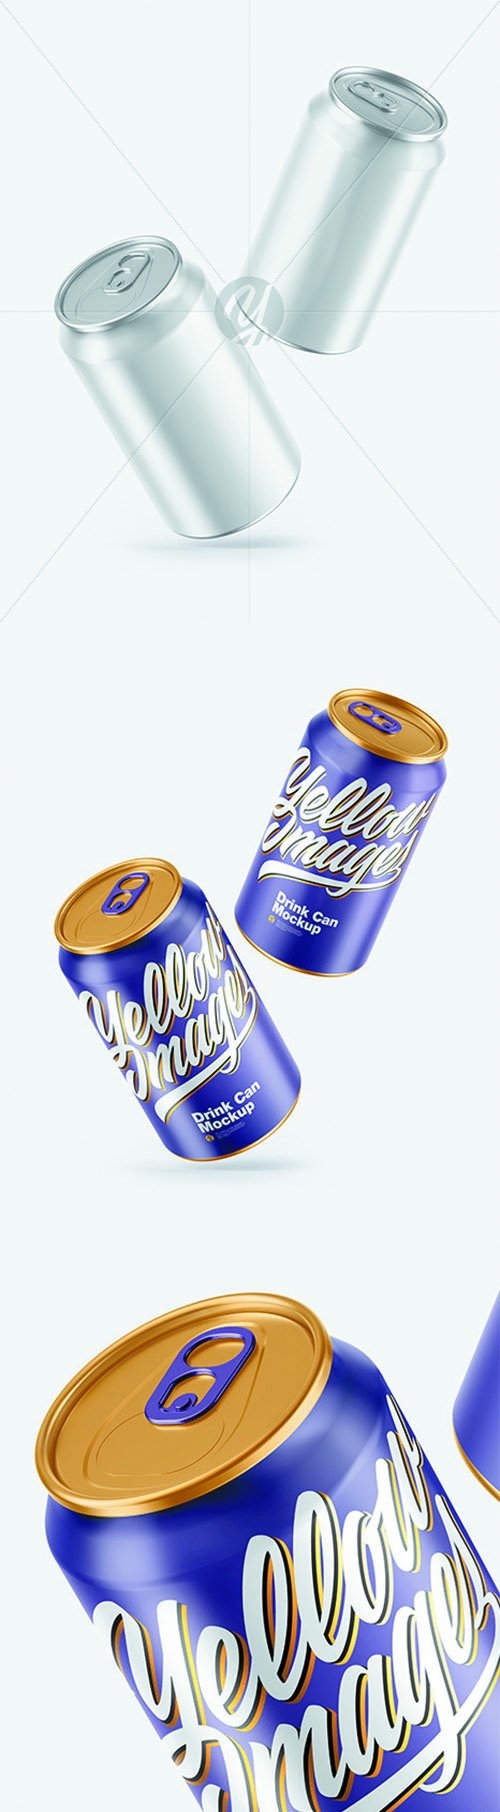 Two Metallic Drink Cans w/ Glossy Finish Mockup 68627